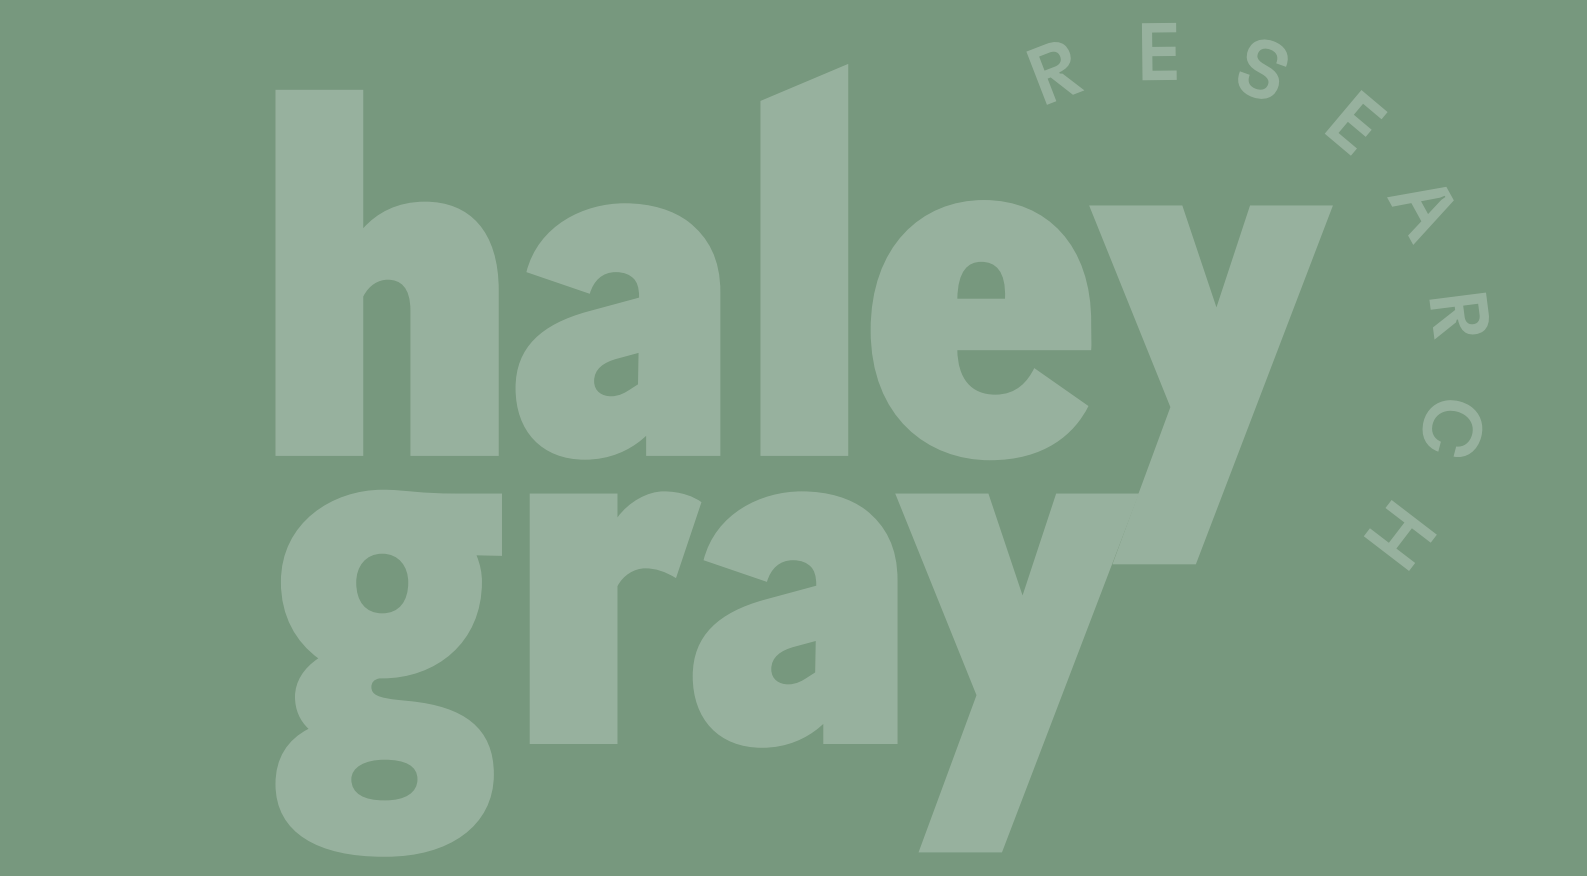 Haley Gray Research